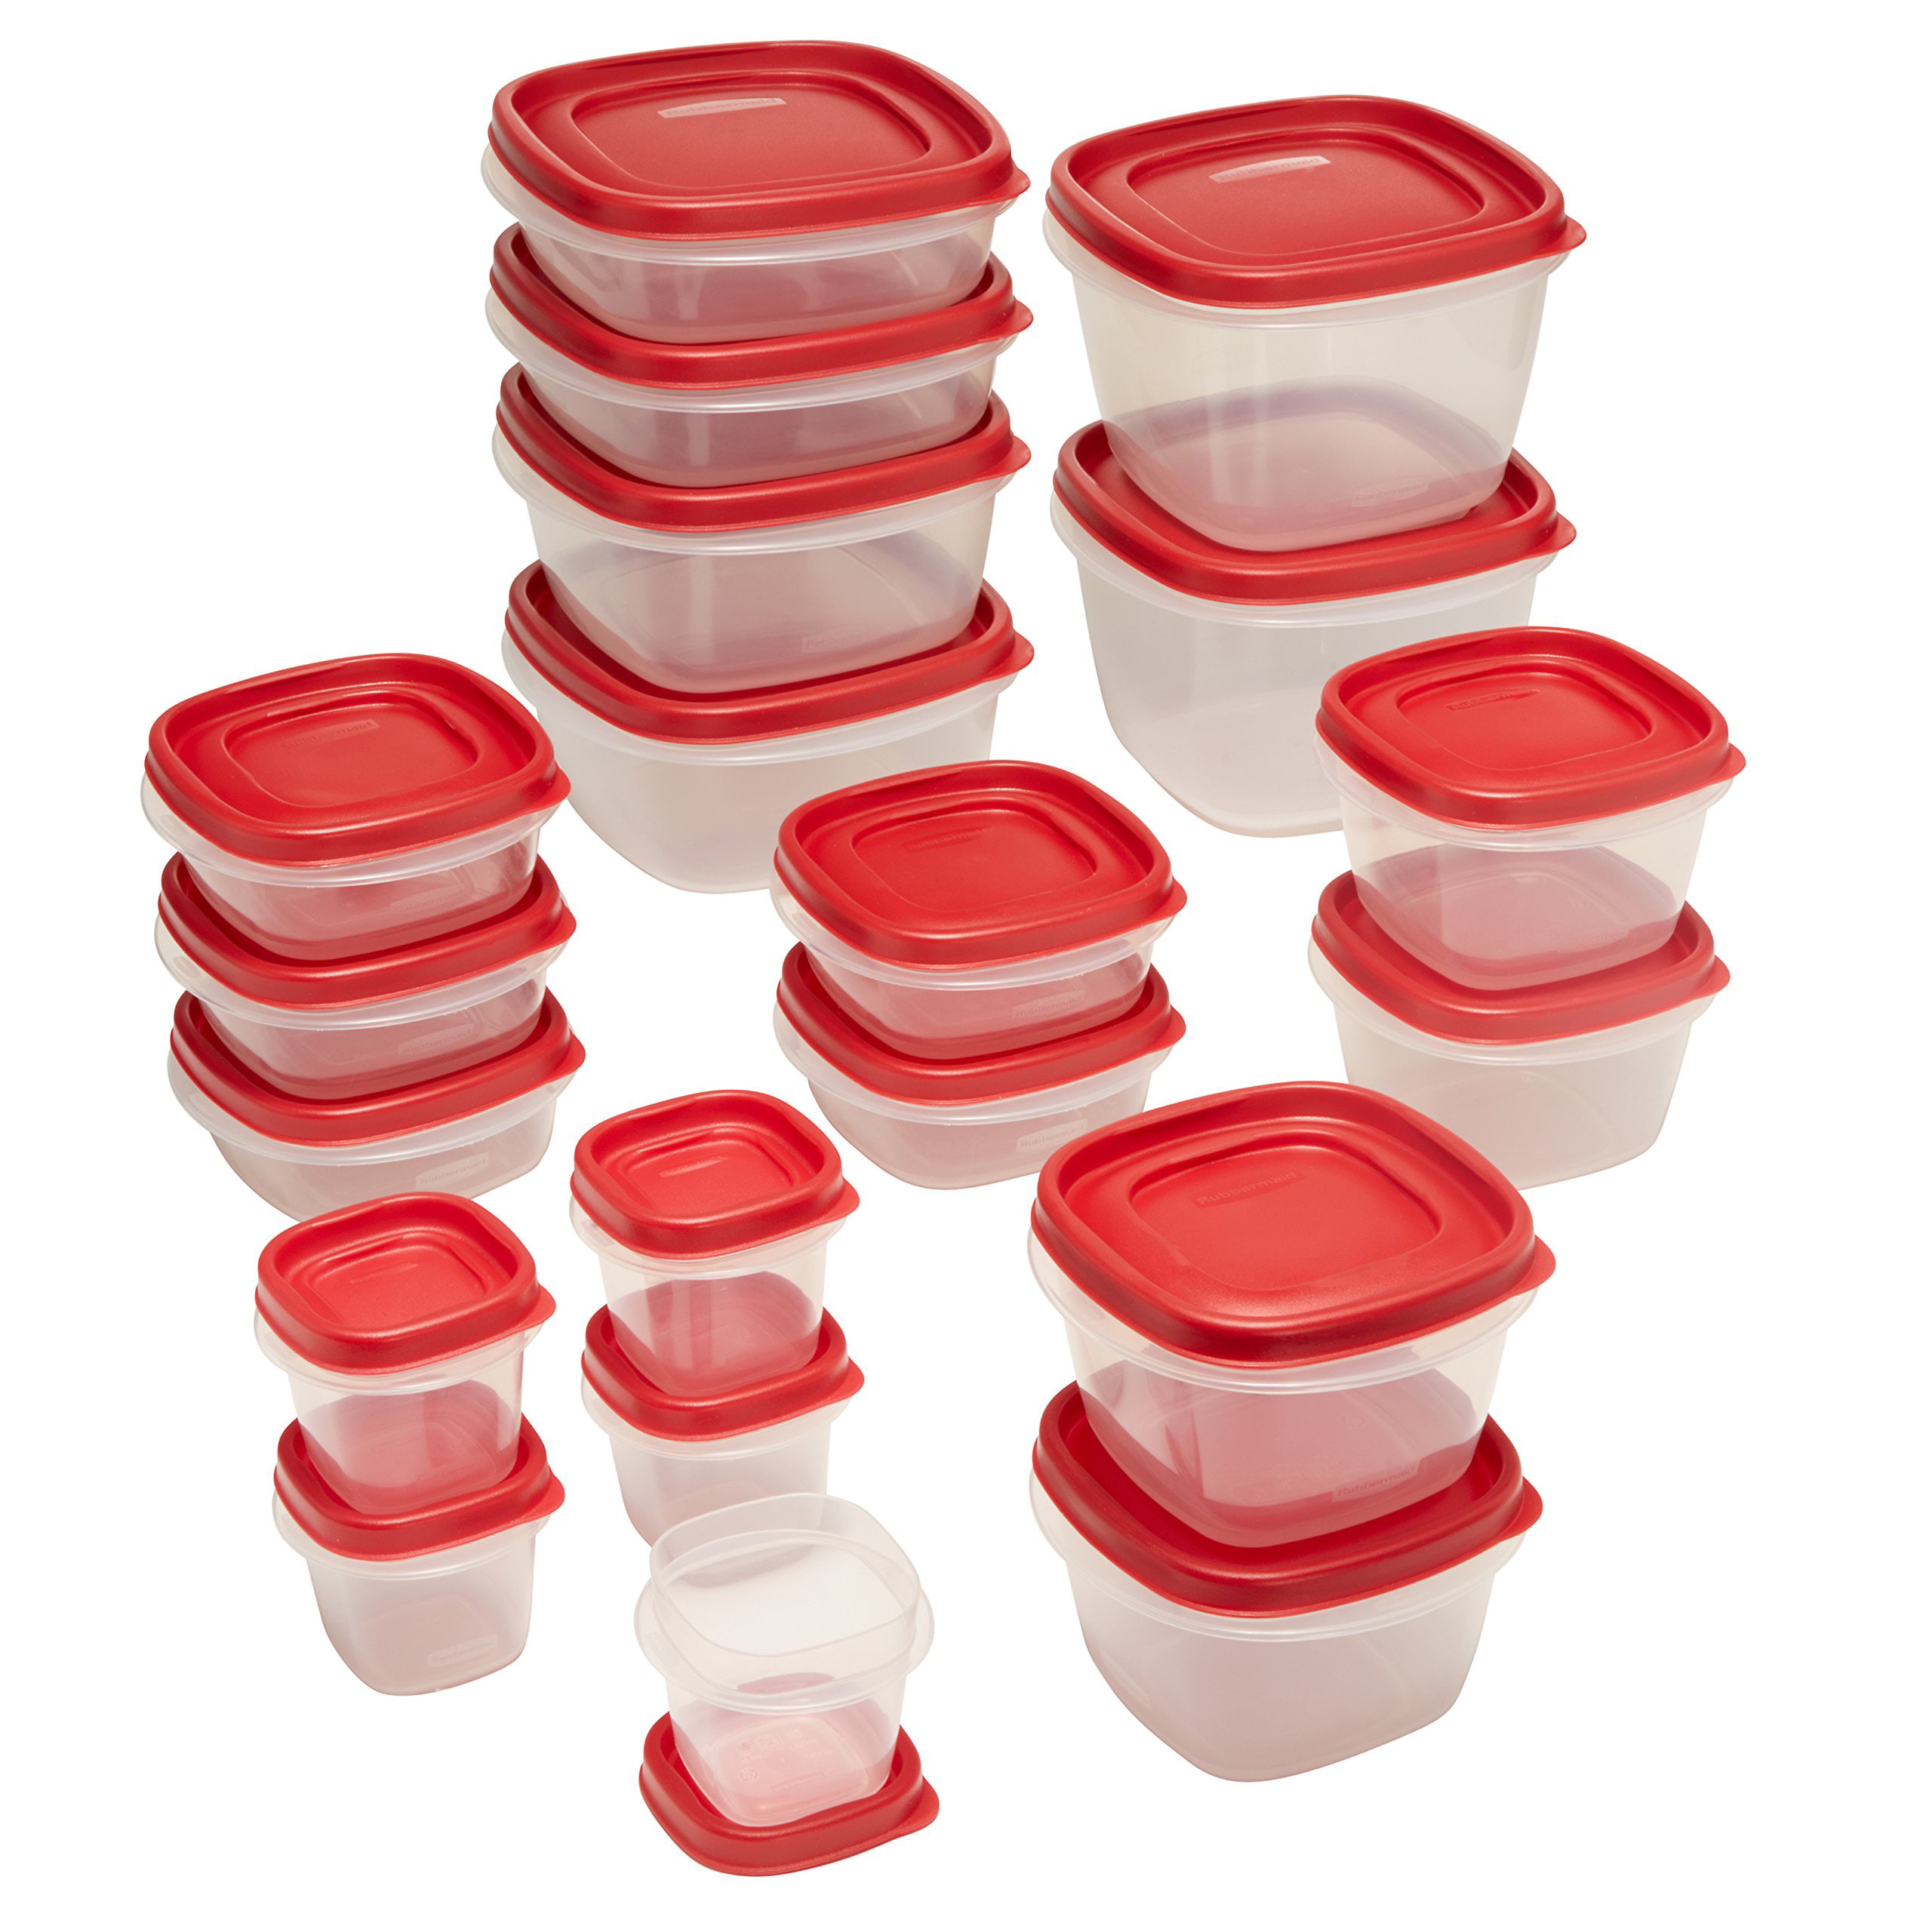 Rubbermaid Easy Find Lids and Containers Set, 40 pc - Kroger